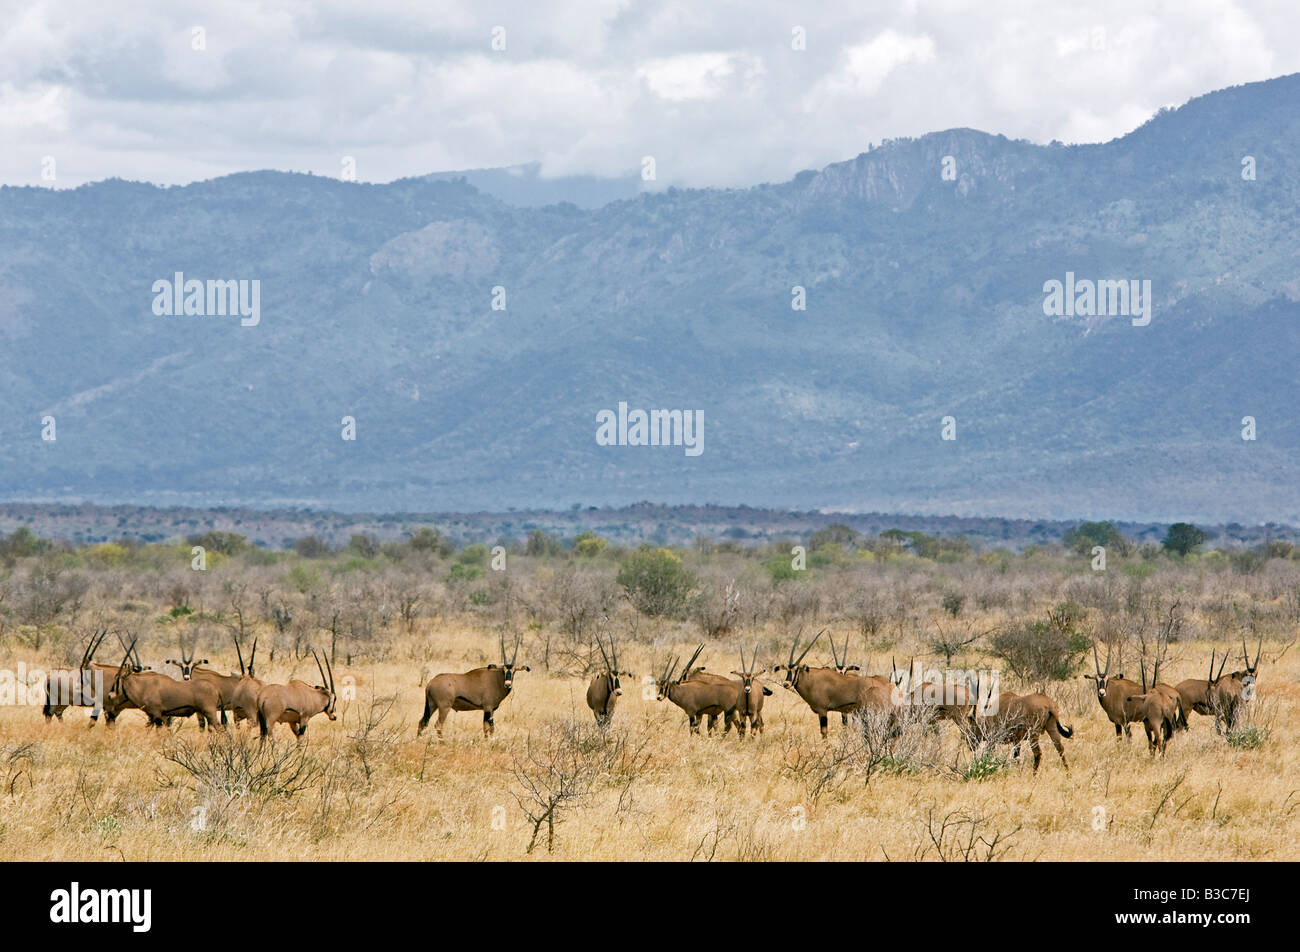 Kenya, Tsavo West National Park. A herd of fringe-eared oryx on the arid plains of Tsavo West National Park with the Pare Mountains dominating the landscape. Stock Photo